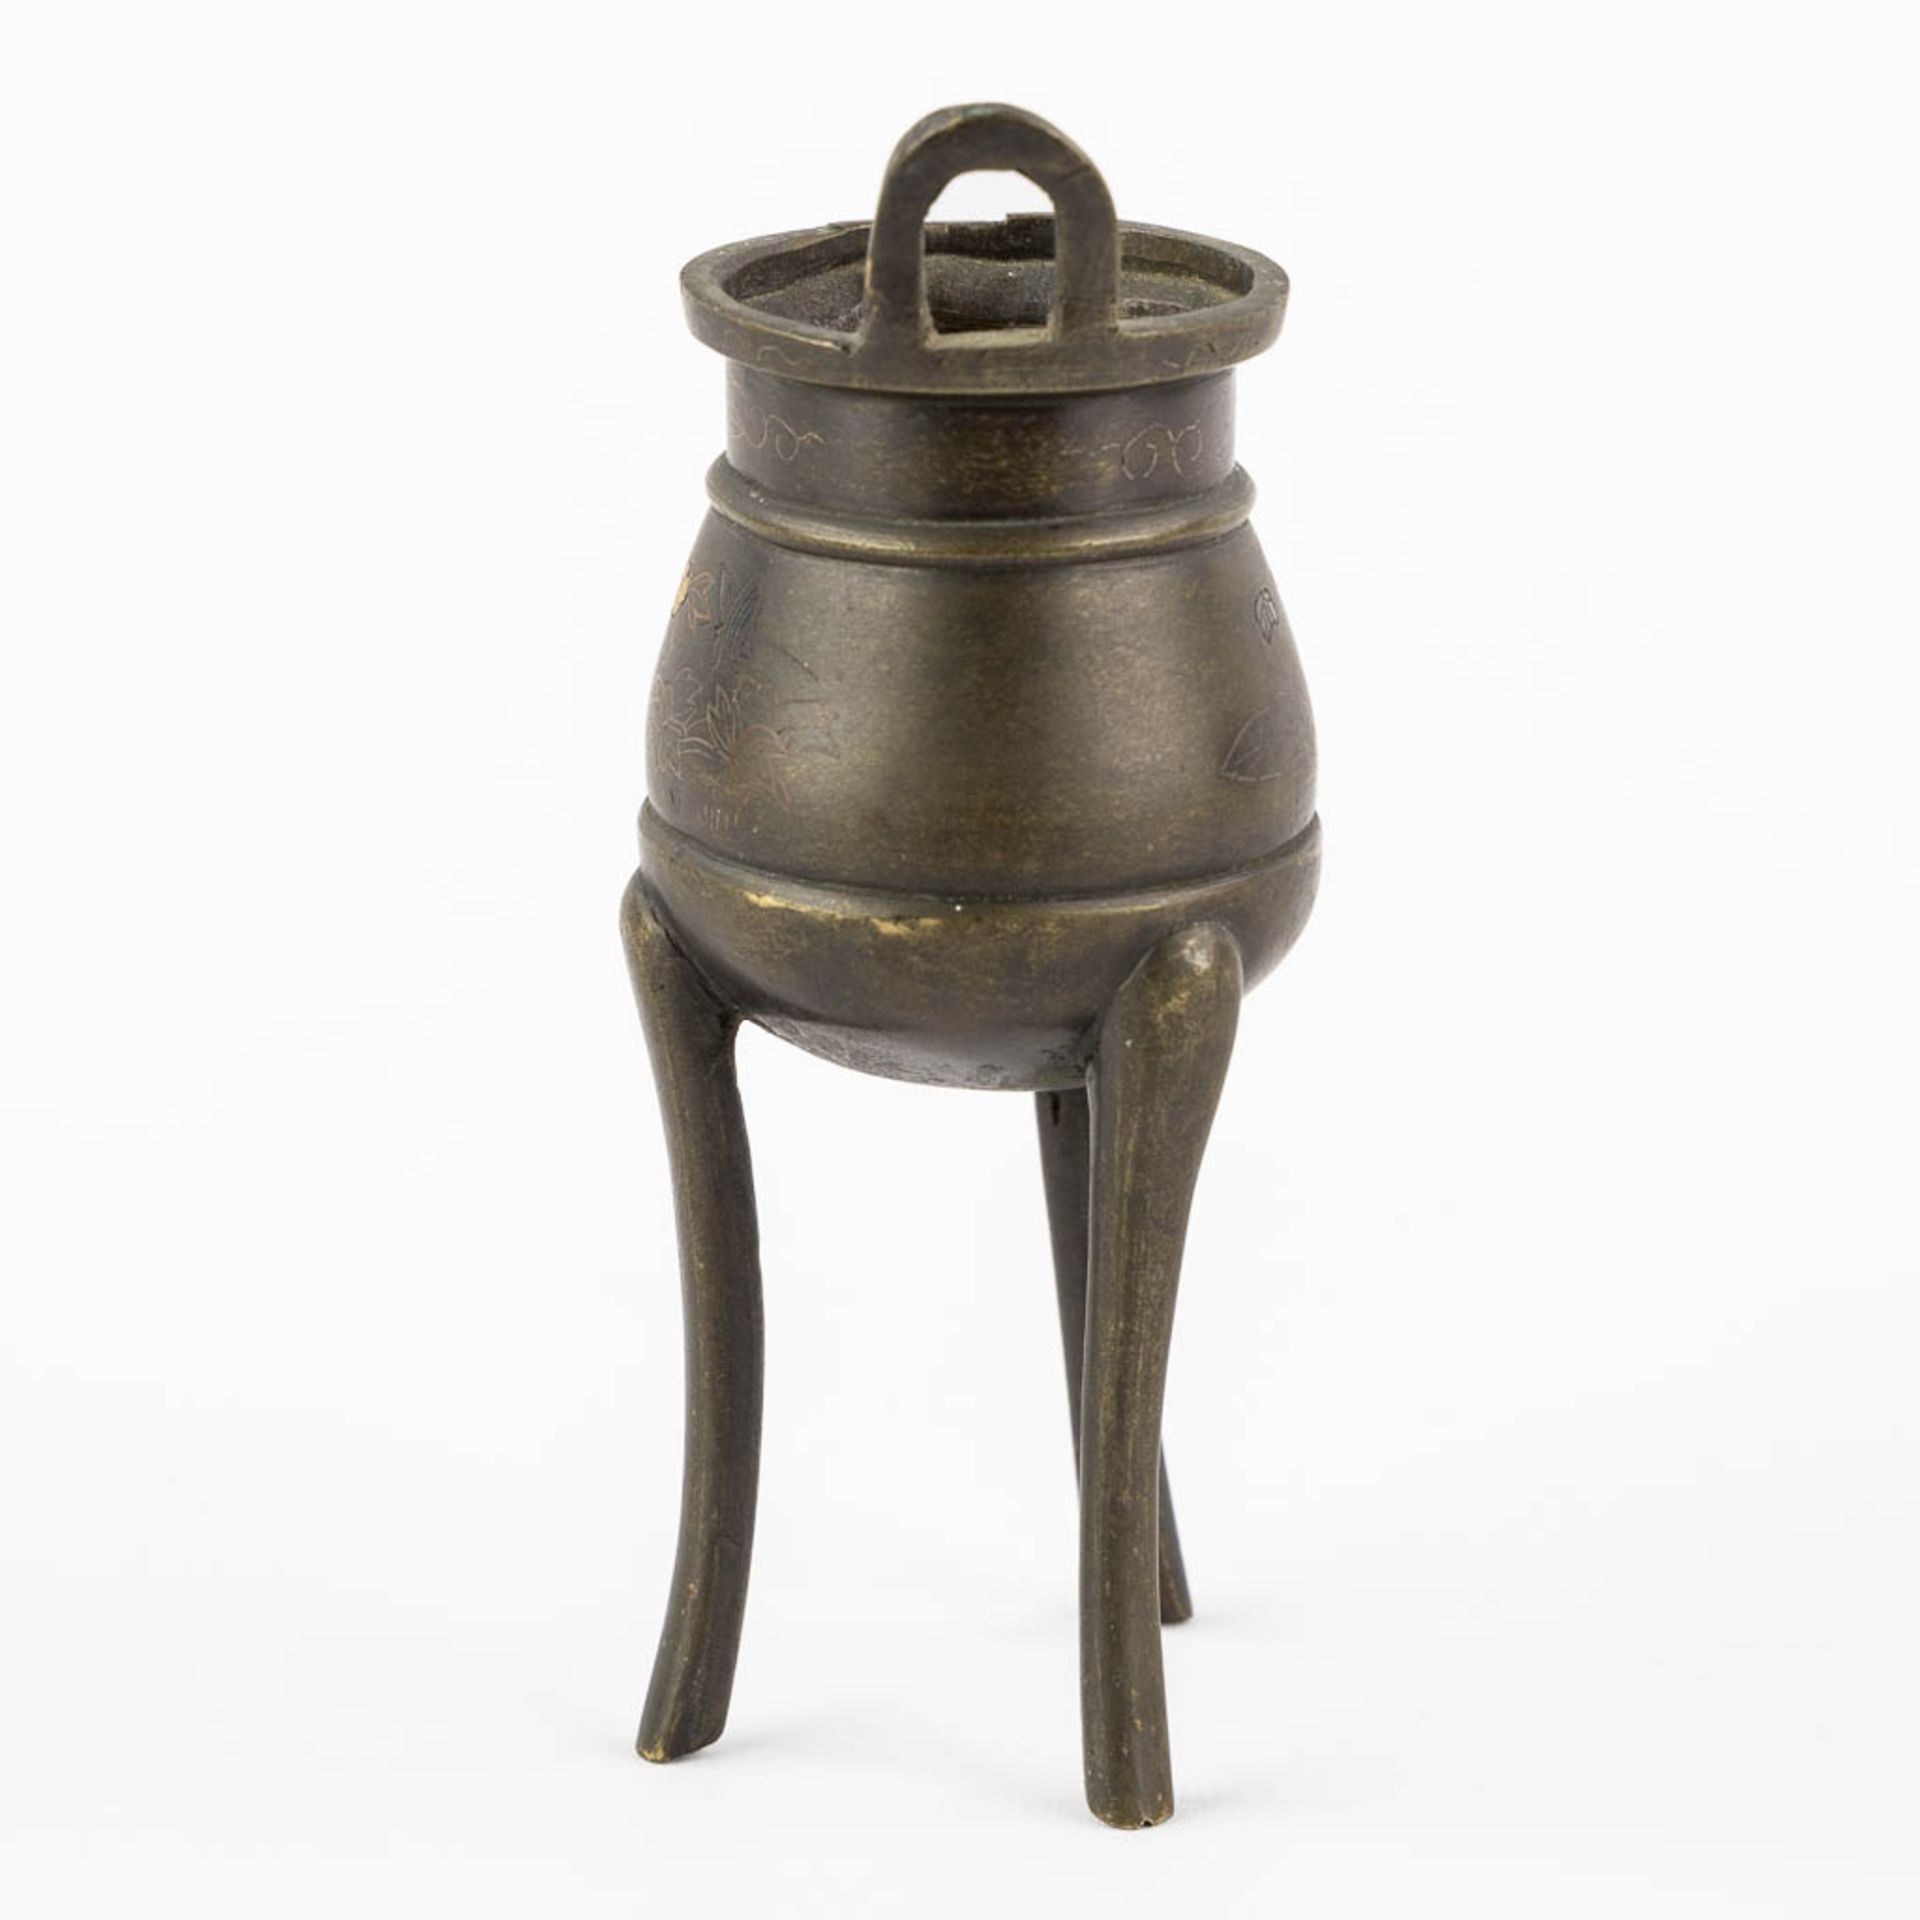 A Chinese insence burner, vase and a lucky coin. Bronze. (H:19 x D:5 cm) - Image 13 of 19